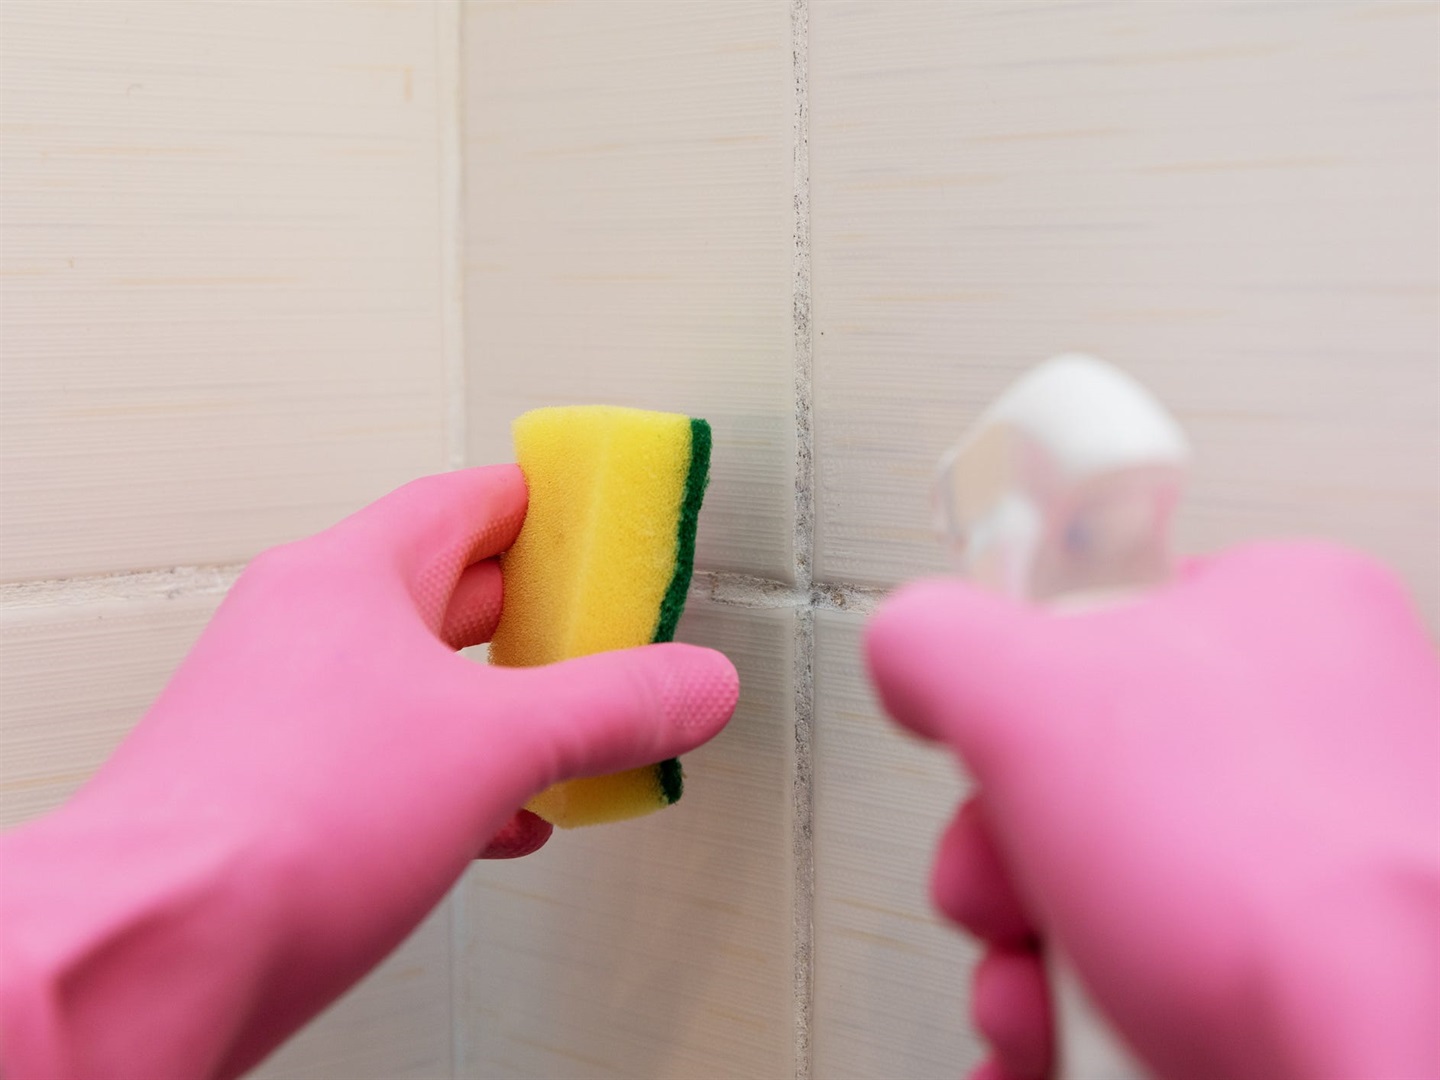 Deep-clean grout at least once a year. ronstik/Getty Images